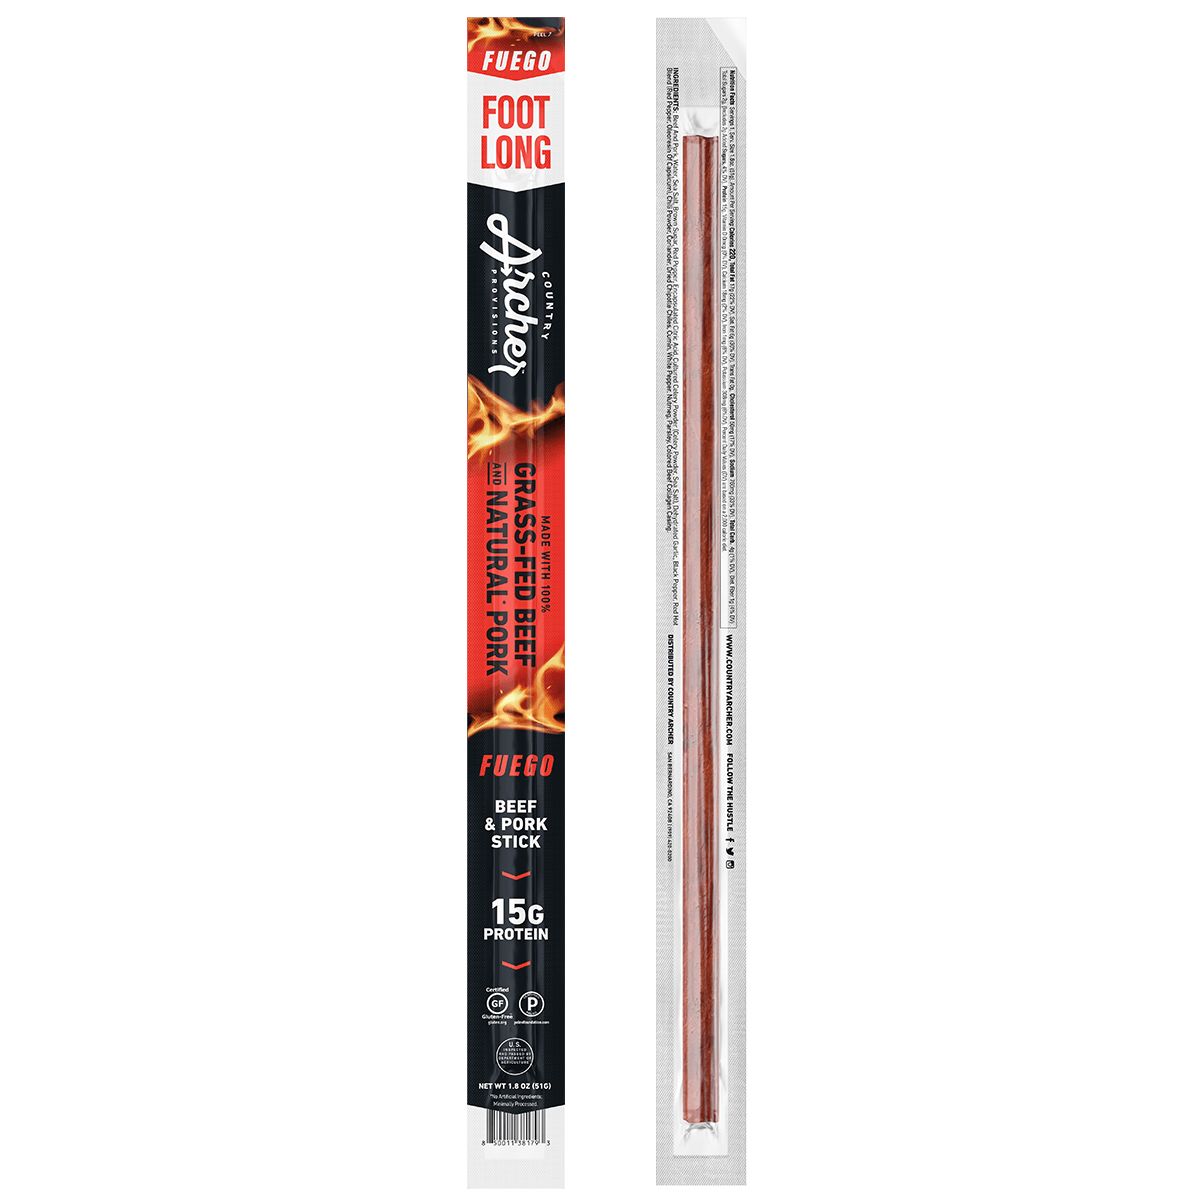  Fuego Footlong Beef & Pork Stick by Country Archer, Fuego Footlong Beef & Pork Stick, Beef - footlong stick - Gluten-Free - Grass Fed Beef - Keto - No Preservatives - Paleo - Real Ingredients - spicy - stick, fuego-footlong-beef-pork-stick, , 1.8oz Stick